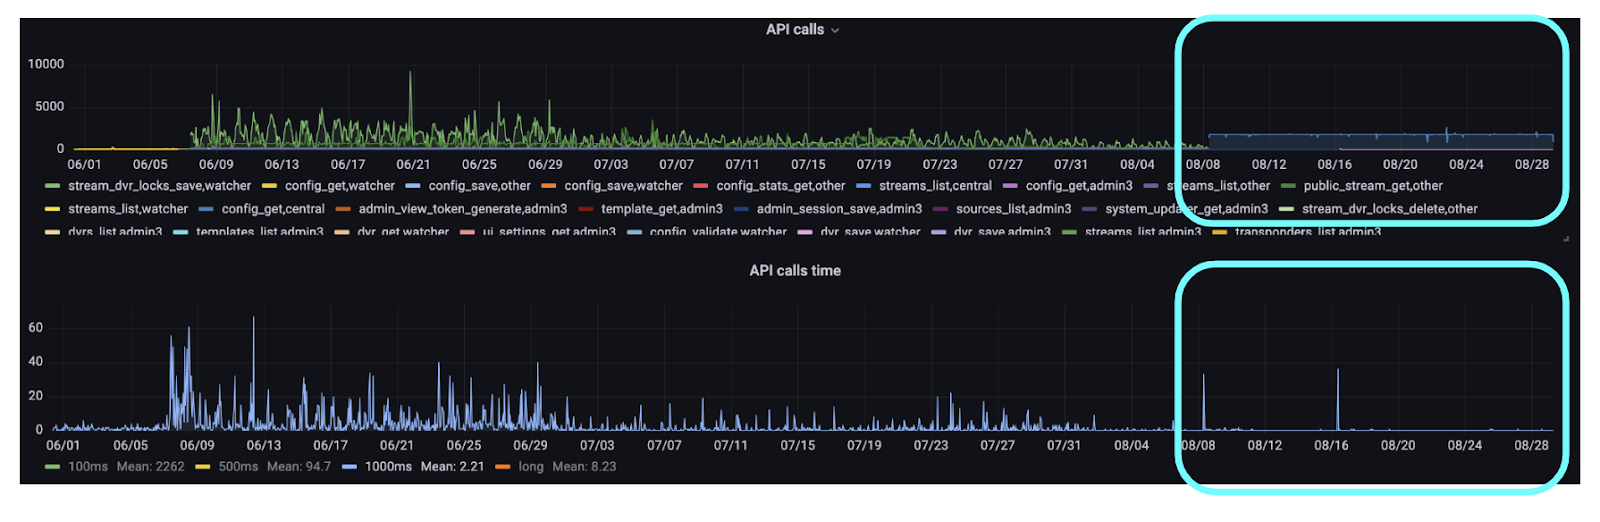 Figure 5. API calls and API calls time graph - big shift after transition to Central in August